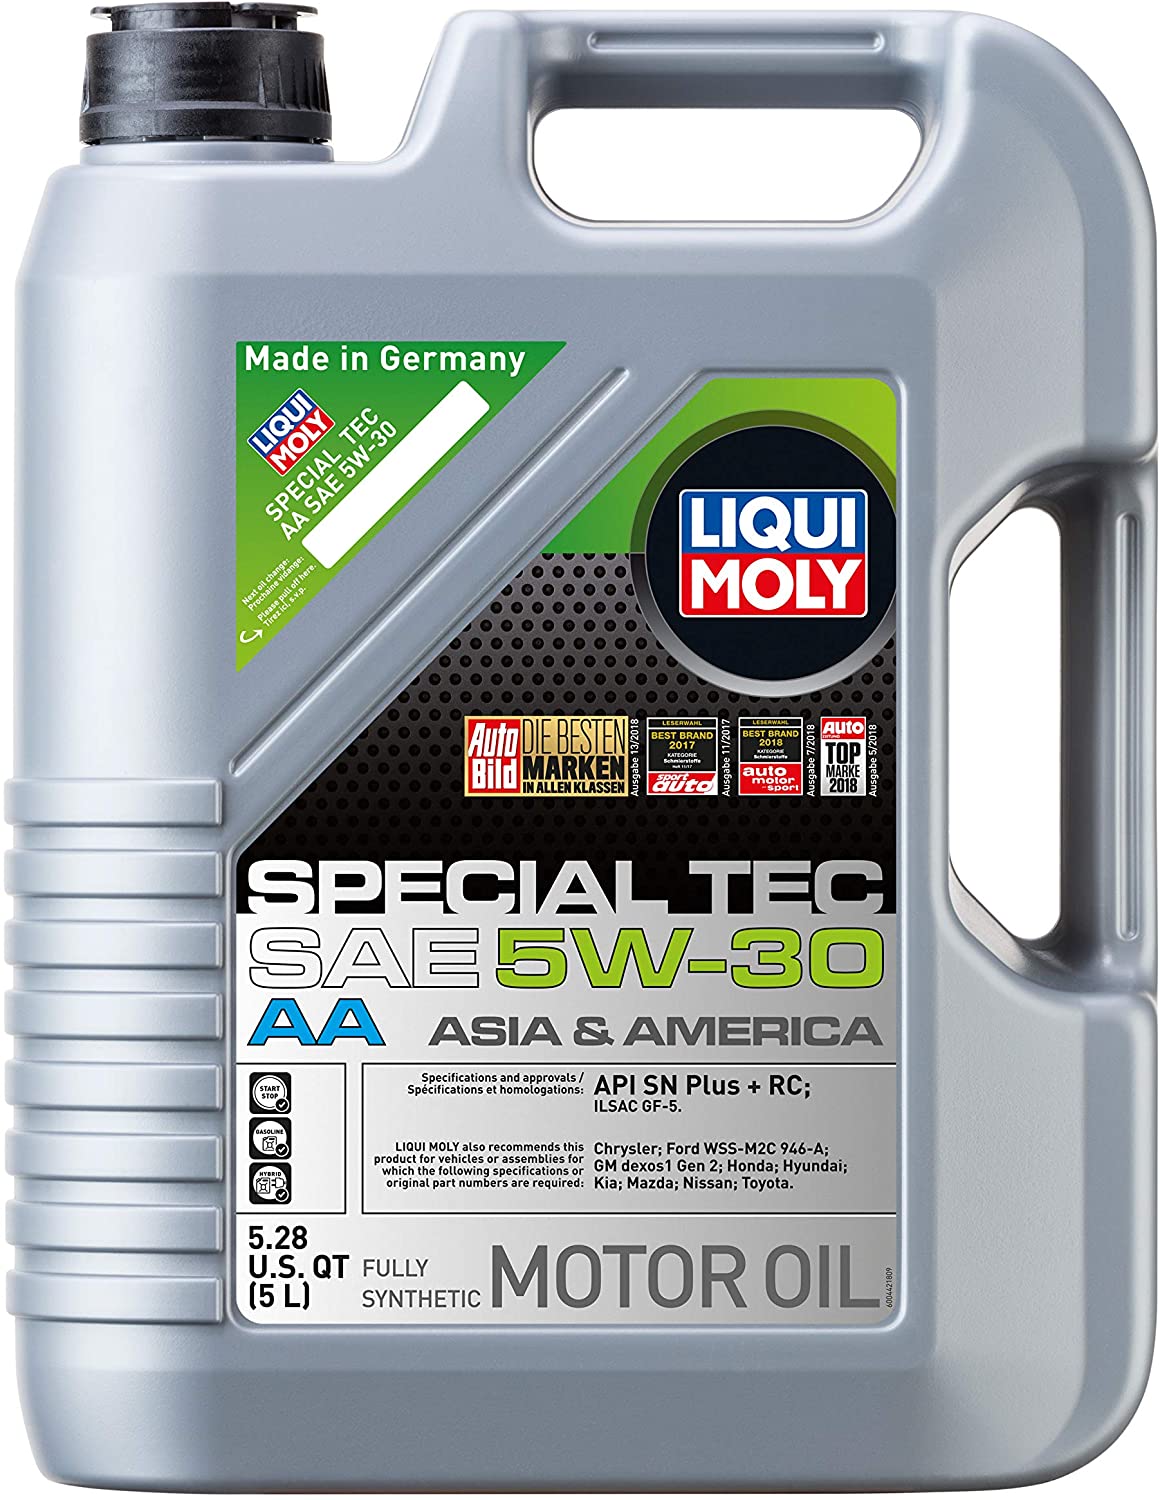 LIQUI MOLY 8 Liter Longlife III 5W-30 Engine Oil + MANN FILTER Package